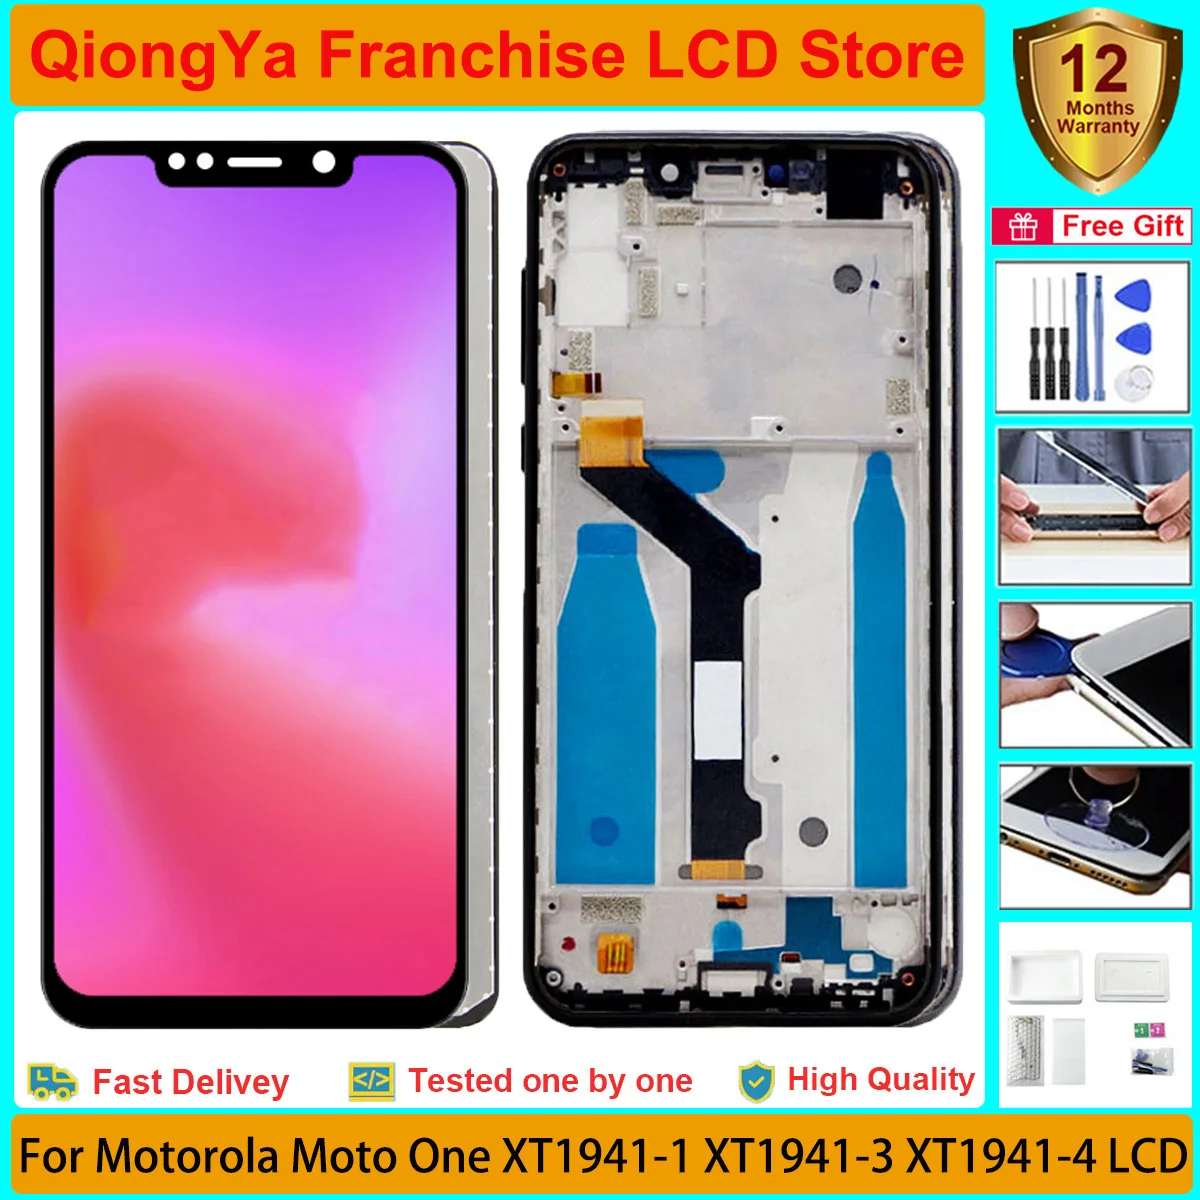 

Original 5.9" New moto P30 Play Display For Motorola Moto One XT1941-1 XT1941-3 XT1941-4 LCD and Touch Screen Digitizer Assembly